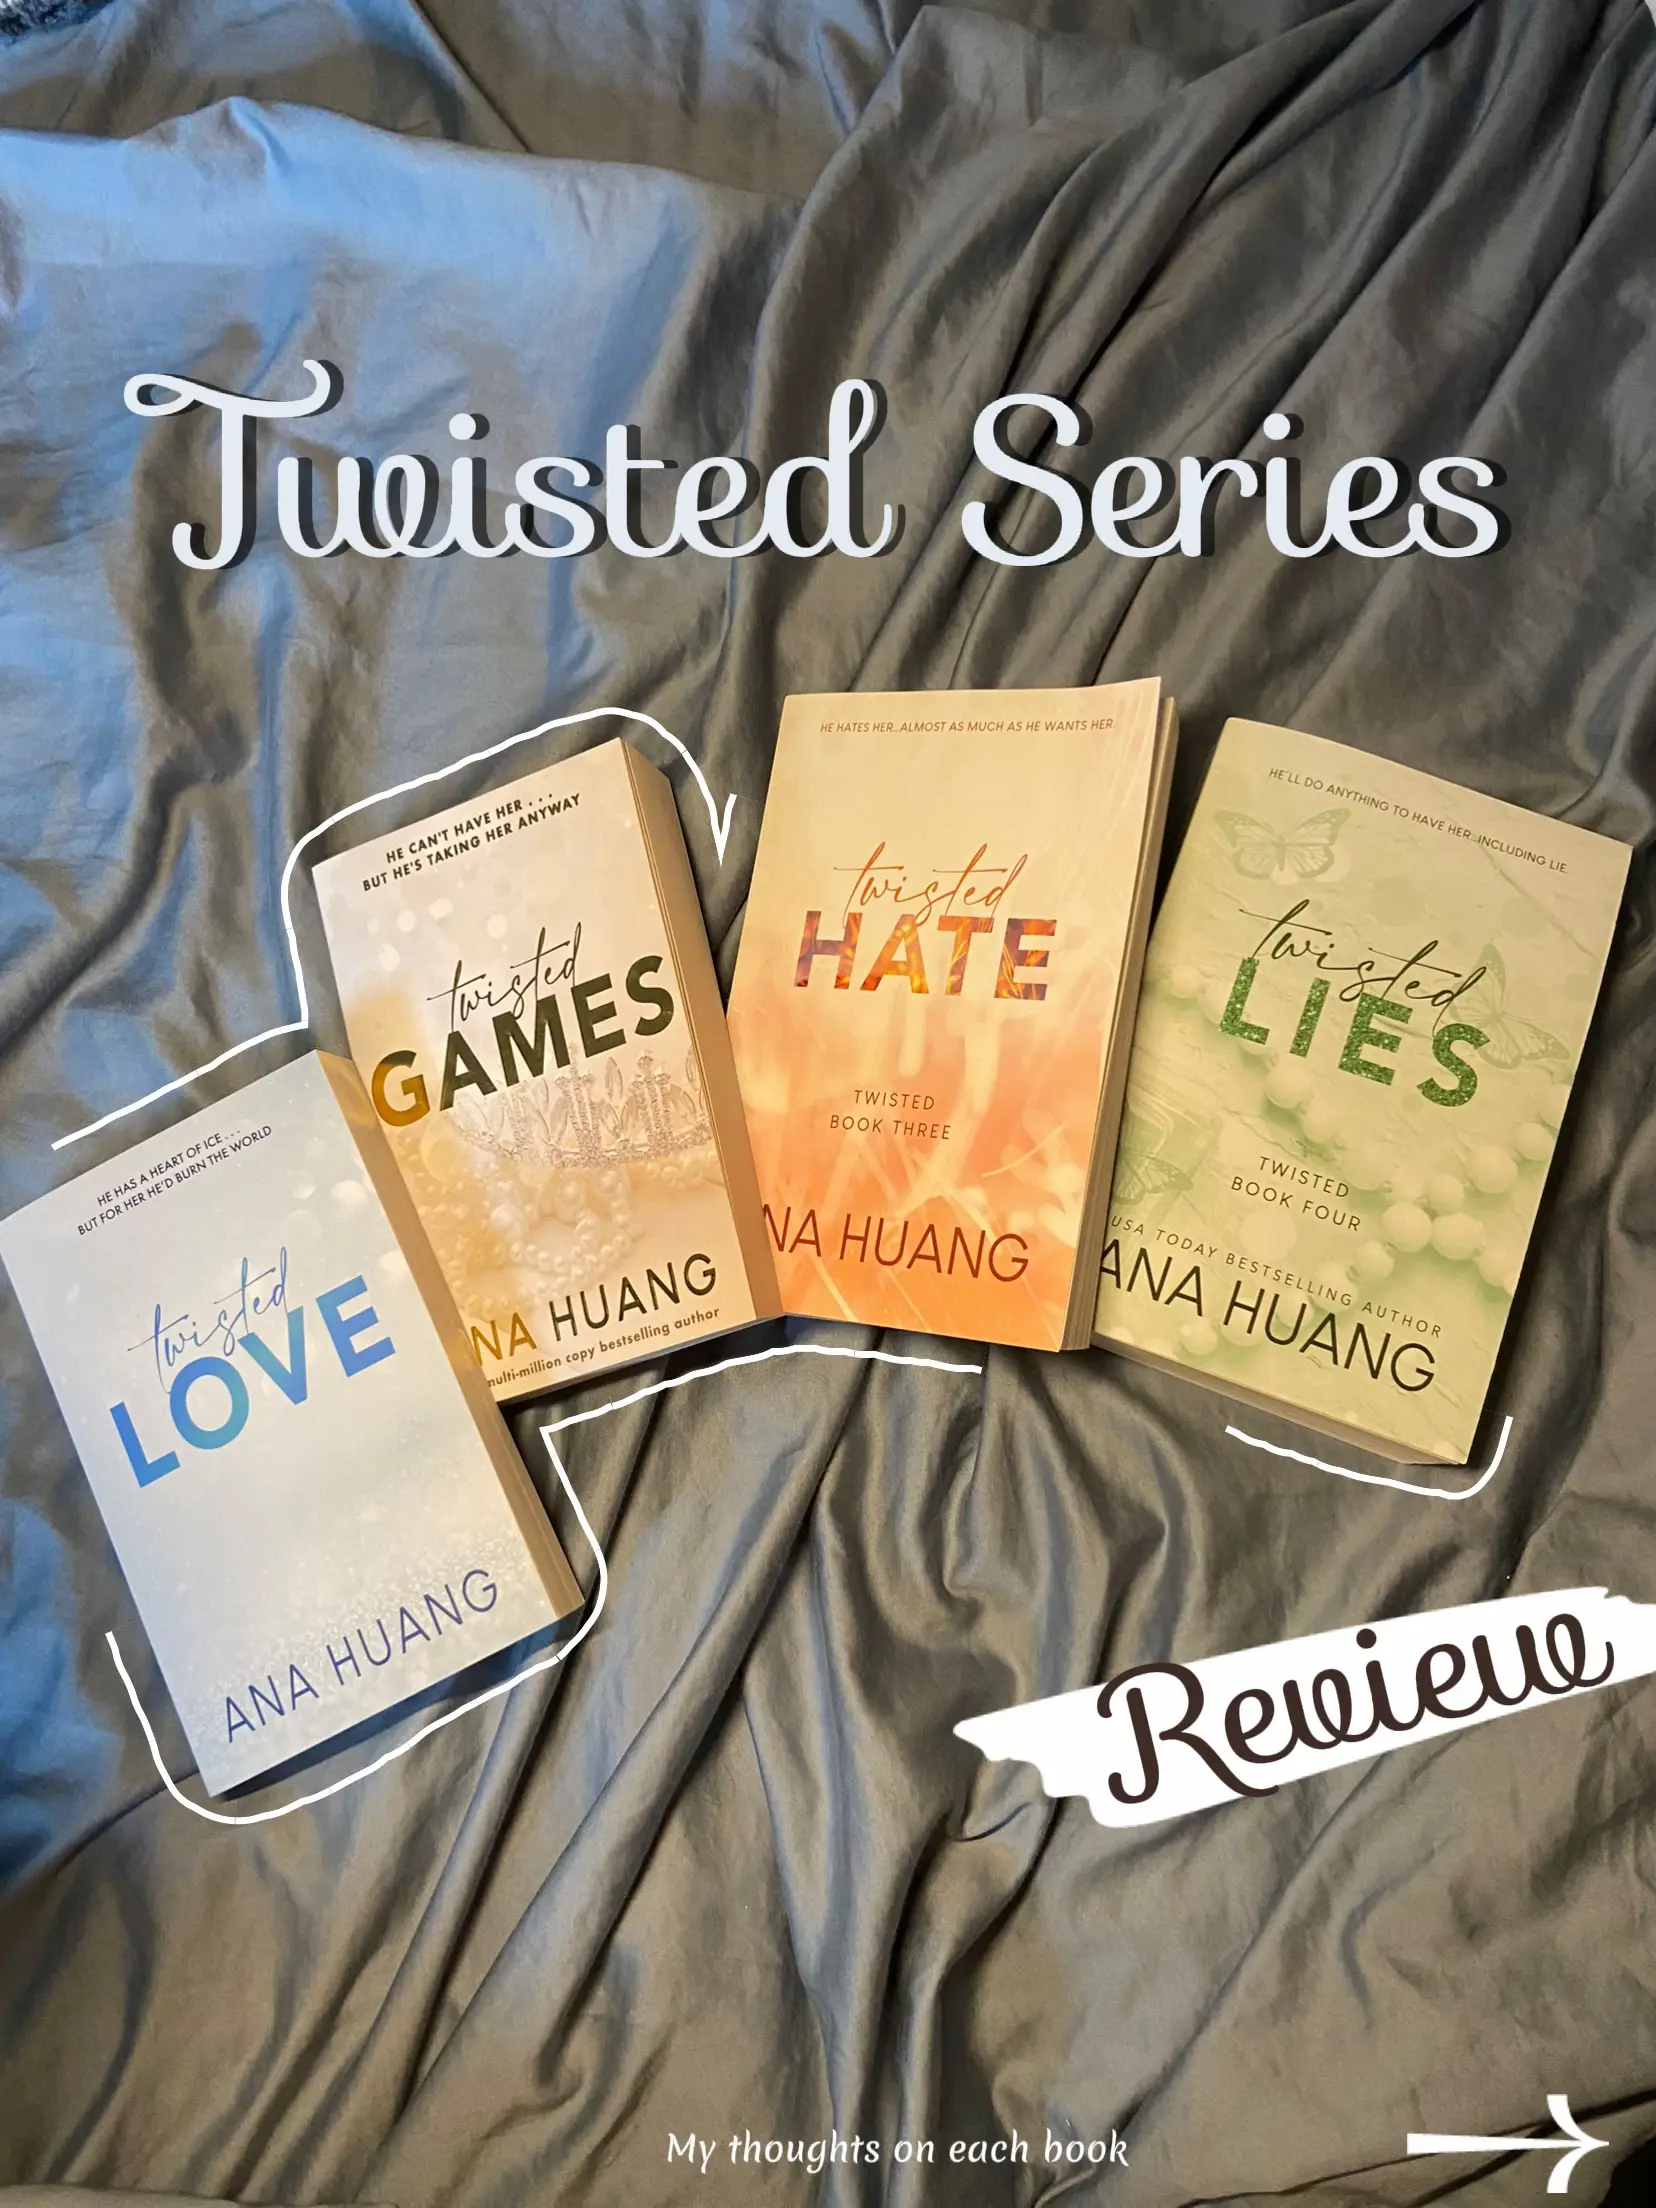 Twisted Lies – From Cover to Covers